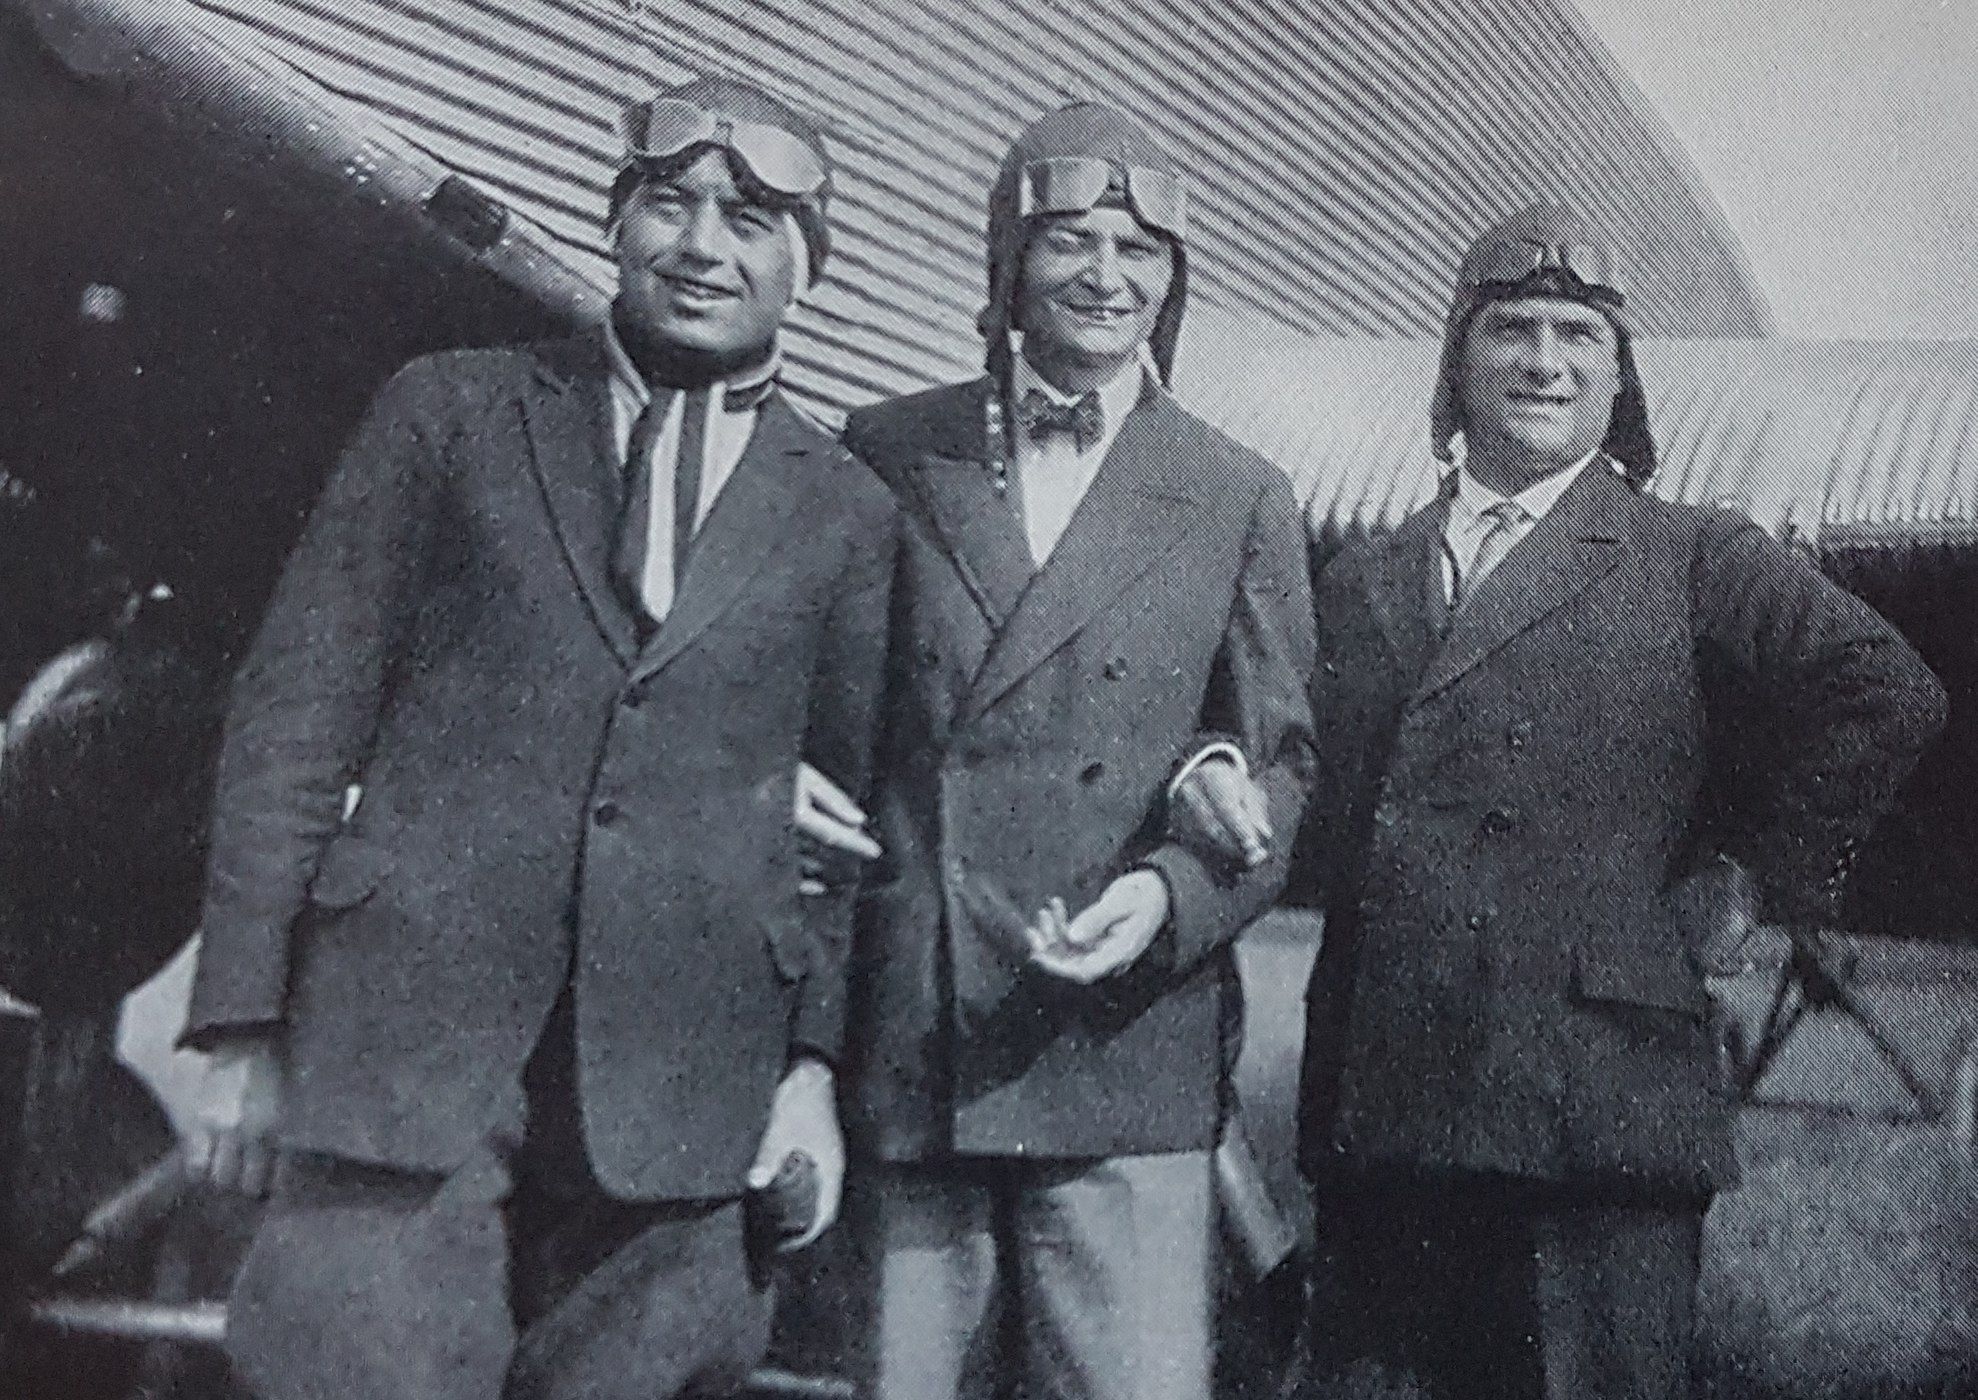 Captain Hermann Koehl, James Fitzmaurice, and Baron von Huenefeld wearing coats and aviator goggles in front of their aircraft